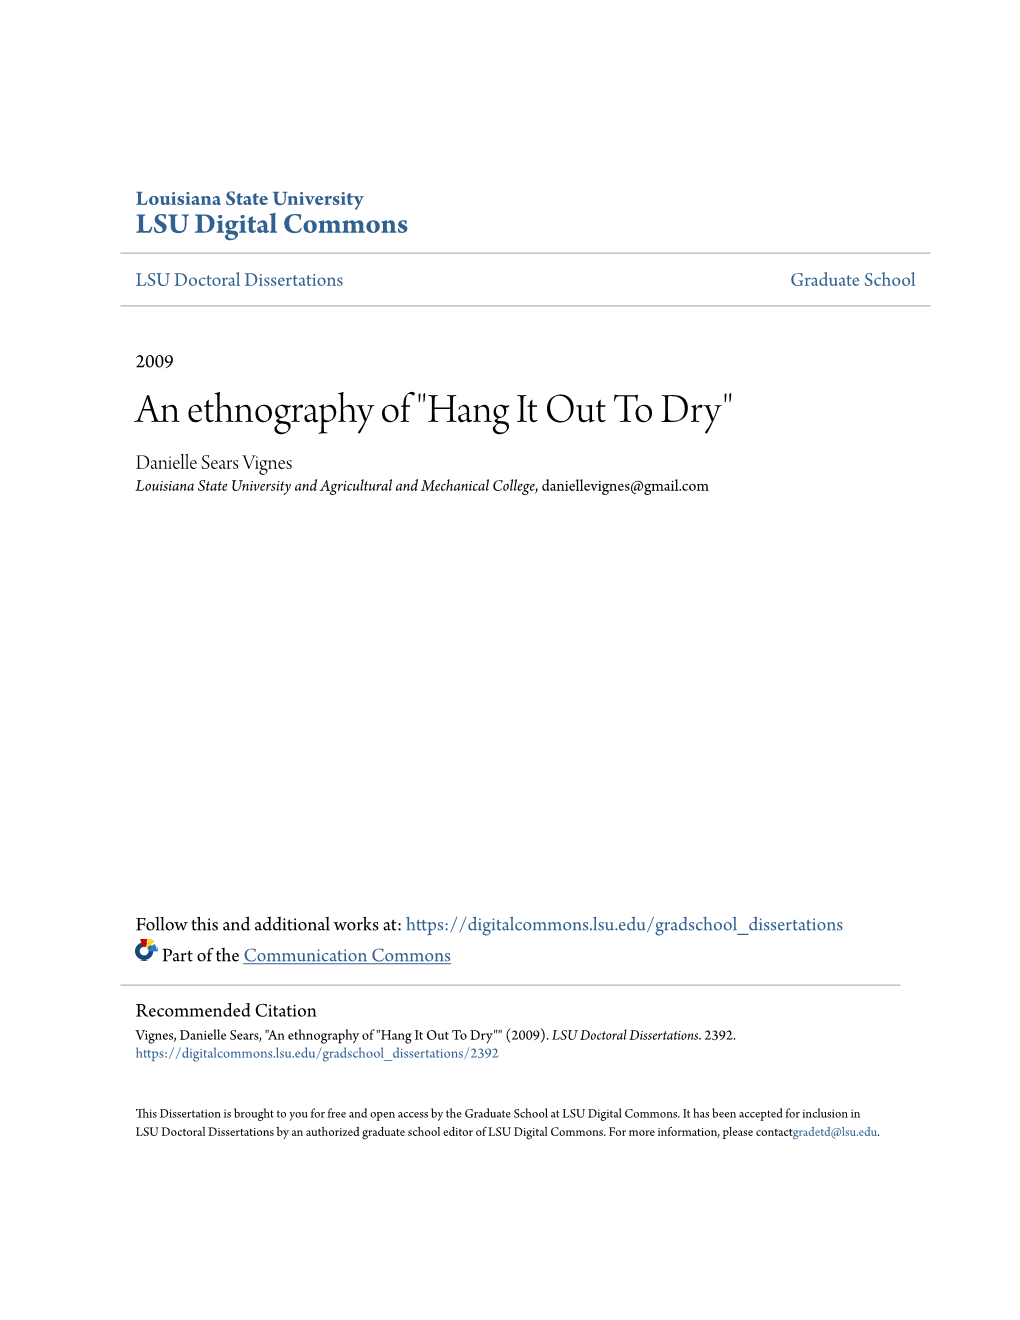 An Ethnography of "Hang It out to Dry" Danielle Sears Vignes Louisiana State University and Agricultural and Mechanical College, Daniellevignes@Gmail.Com